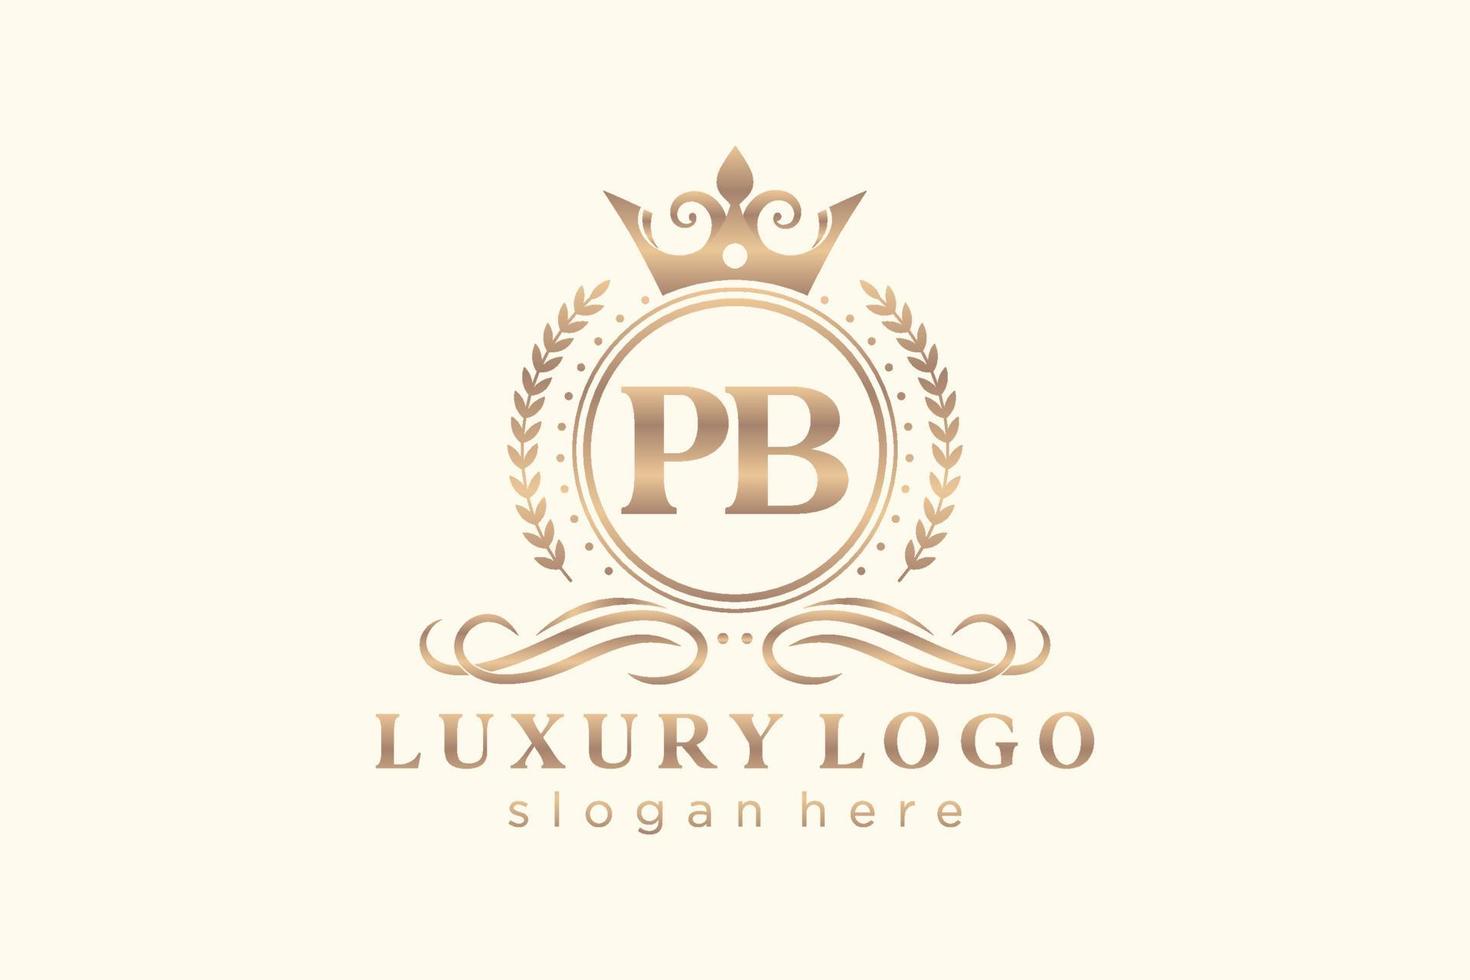 Initial PB Letter Royal Luxury Logo template in vector art for Restaurant, Royalty, Boutique, Cafe, Hotel, Heraldic, Jewelry, Fashion and other vector illustration.